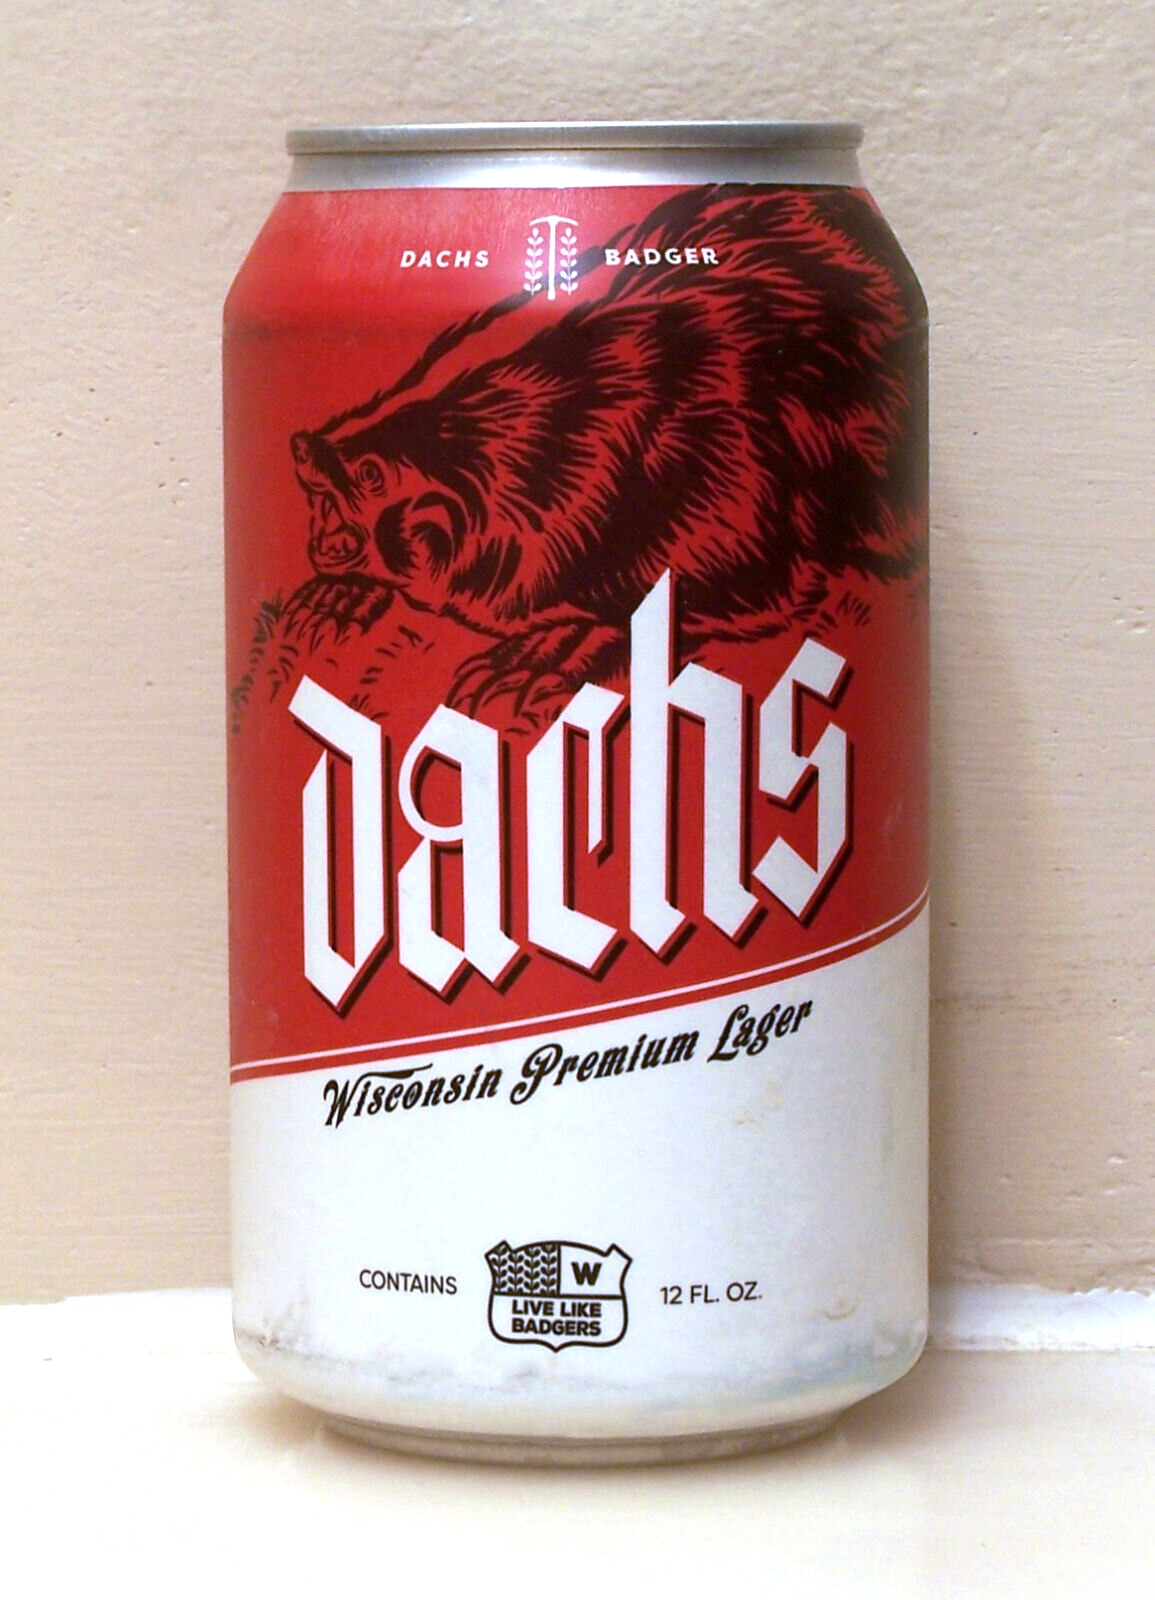 DACHS Wisconsin Premium Lager beer can